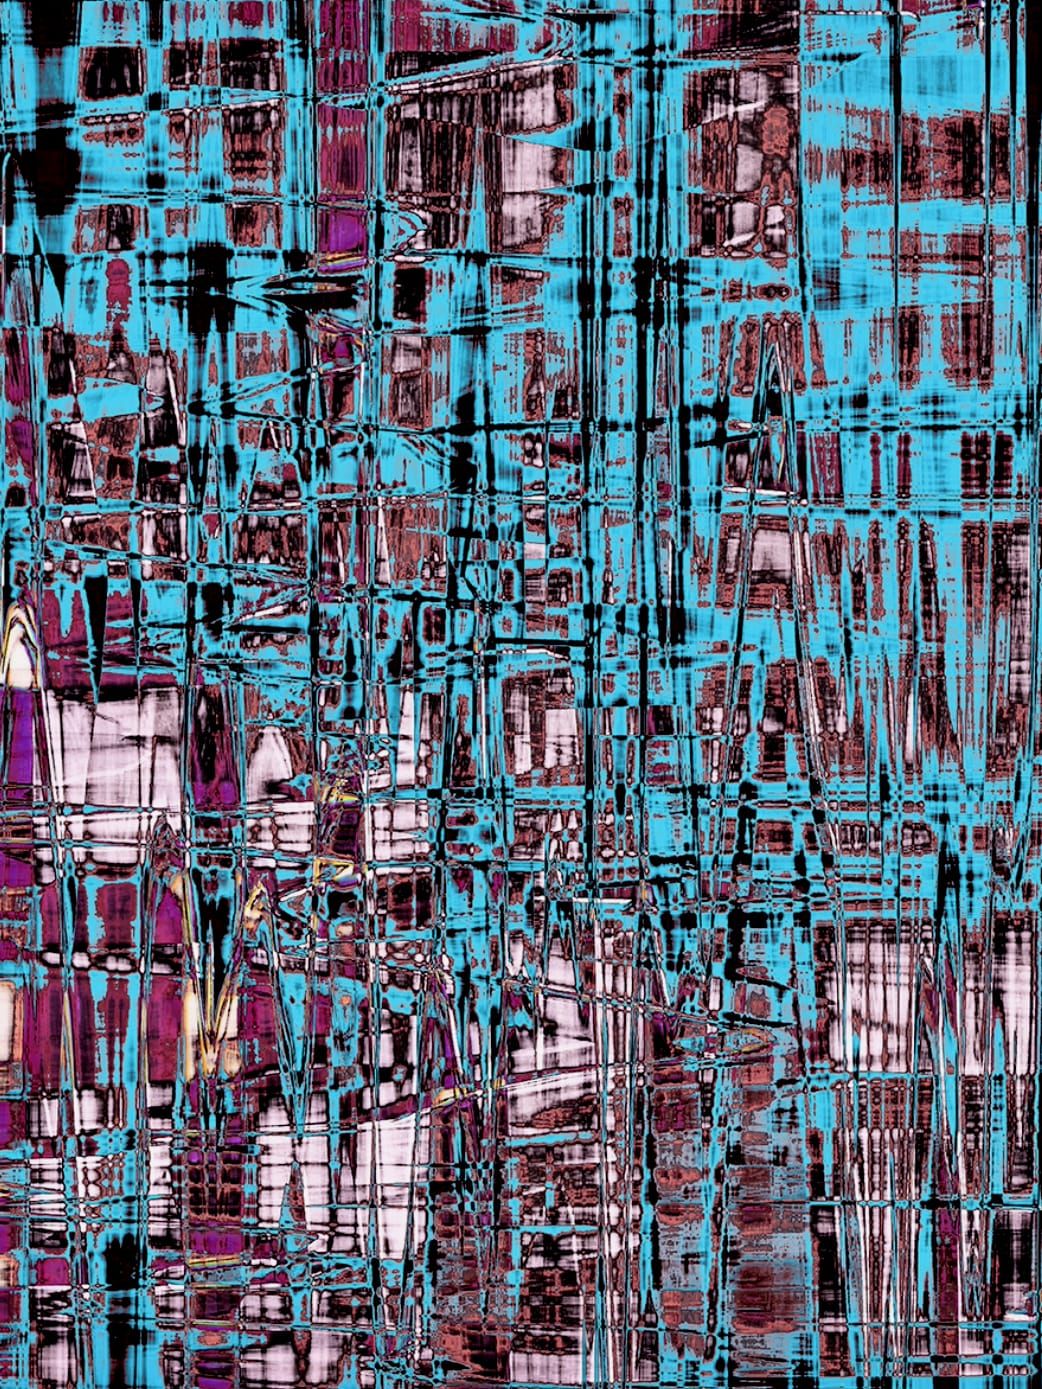 Photography, Scanography by Michael Monney aka acylmx, Abstract image in blue, pink and purple.